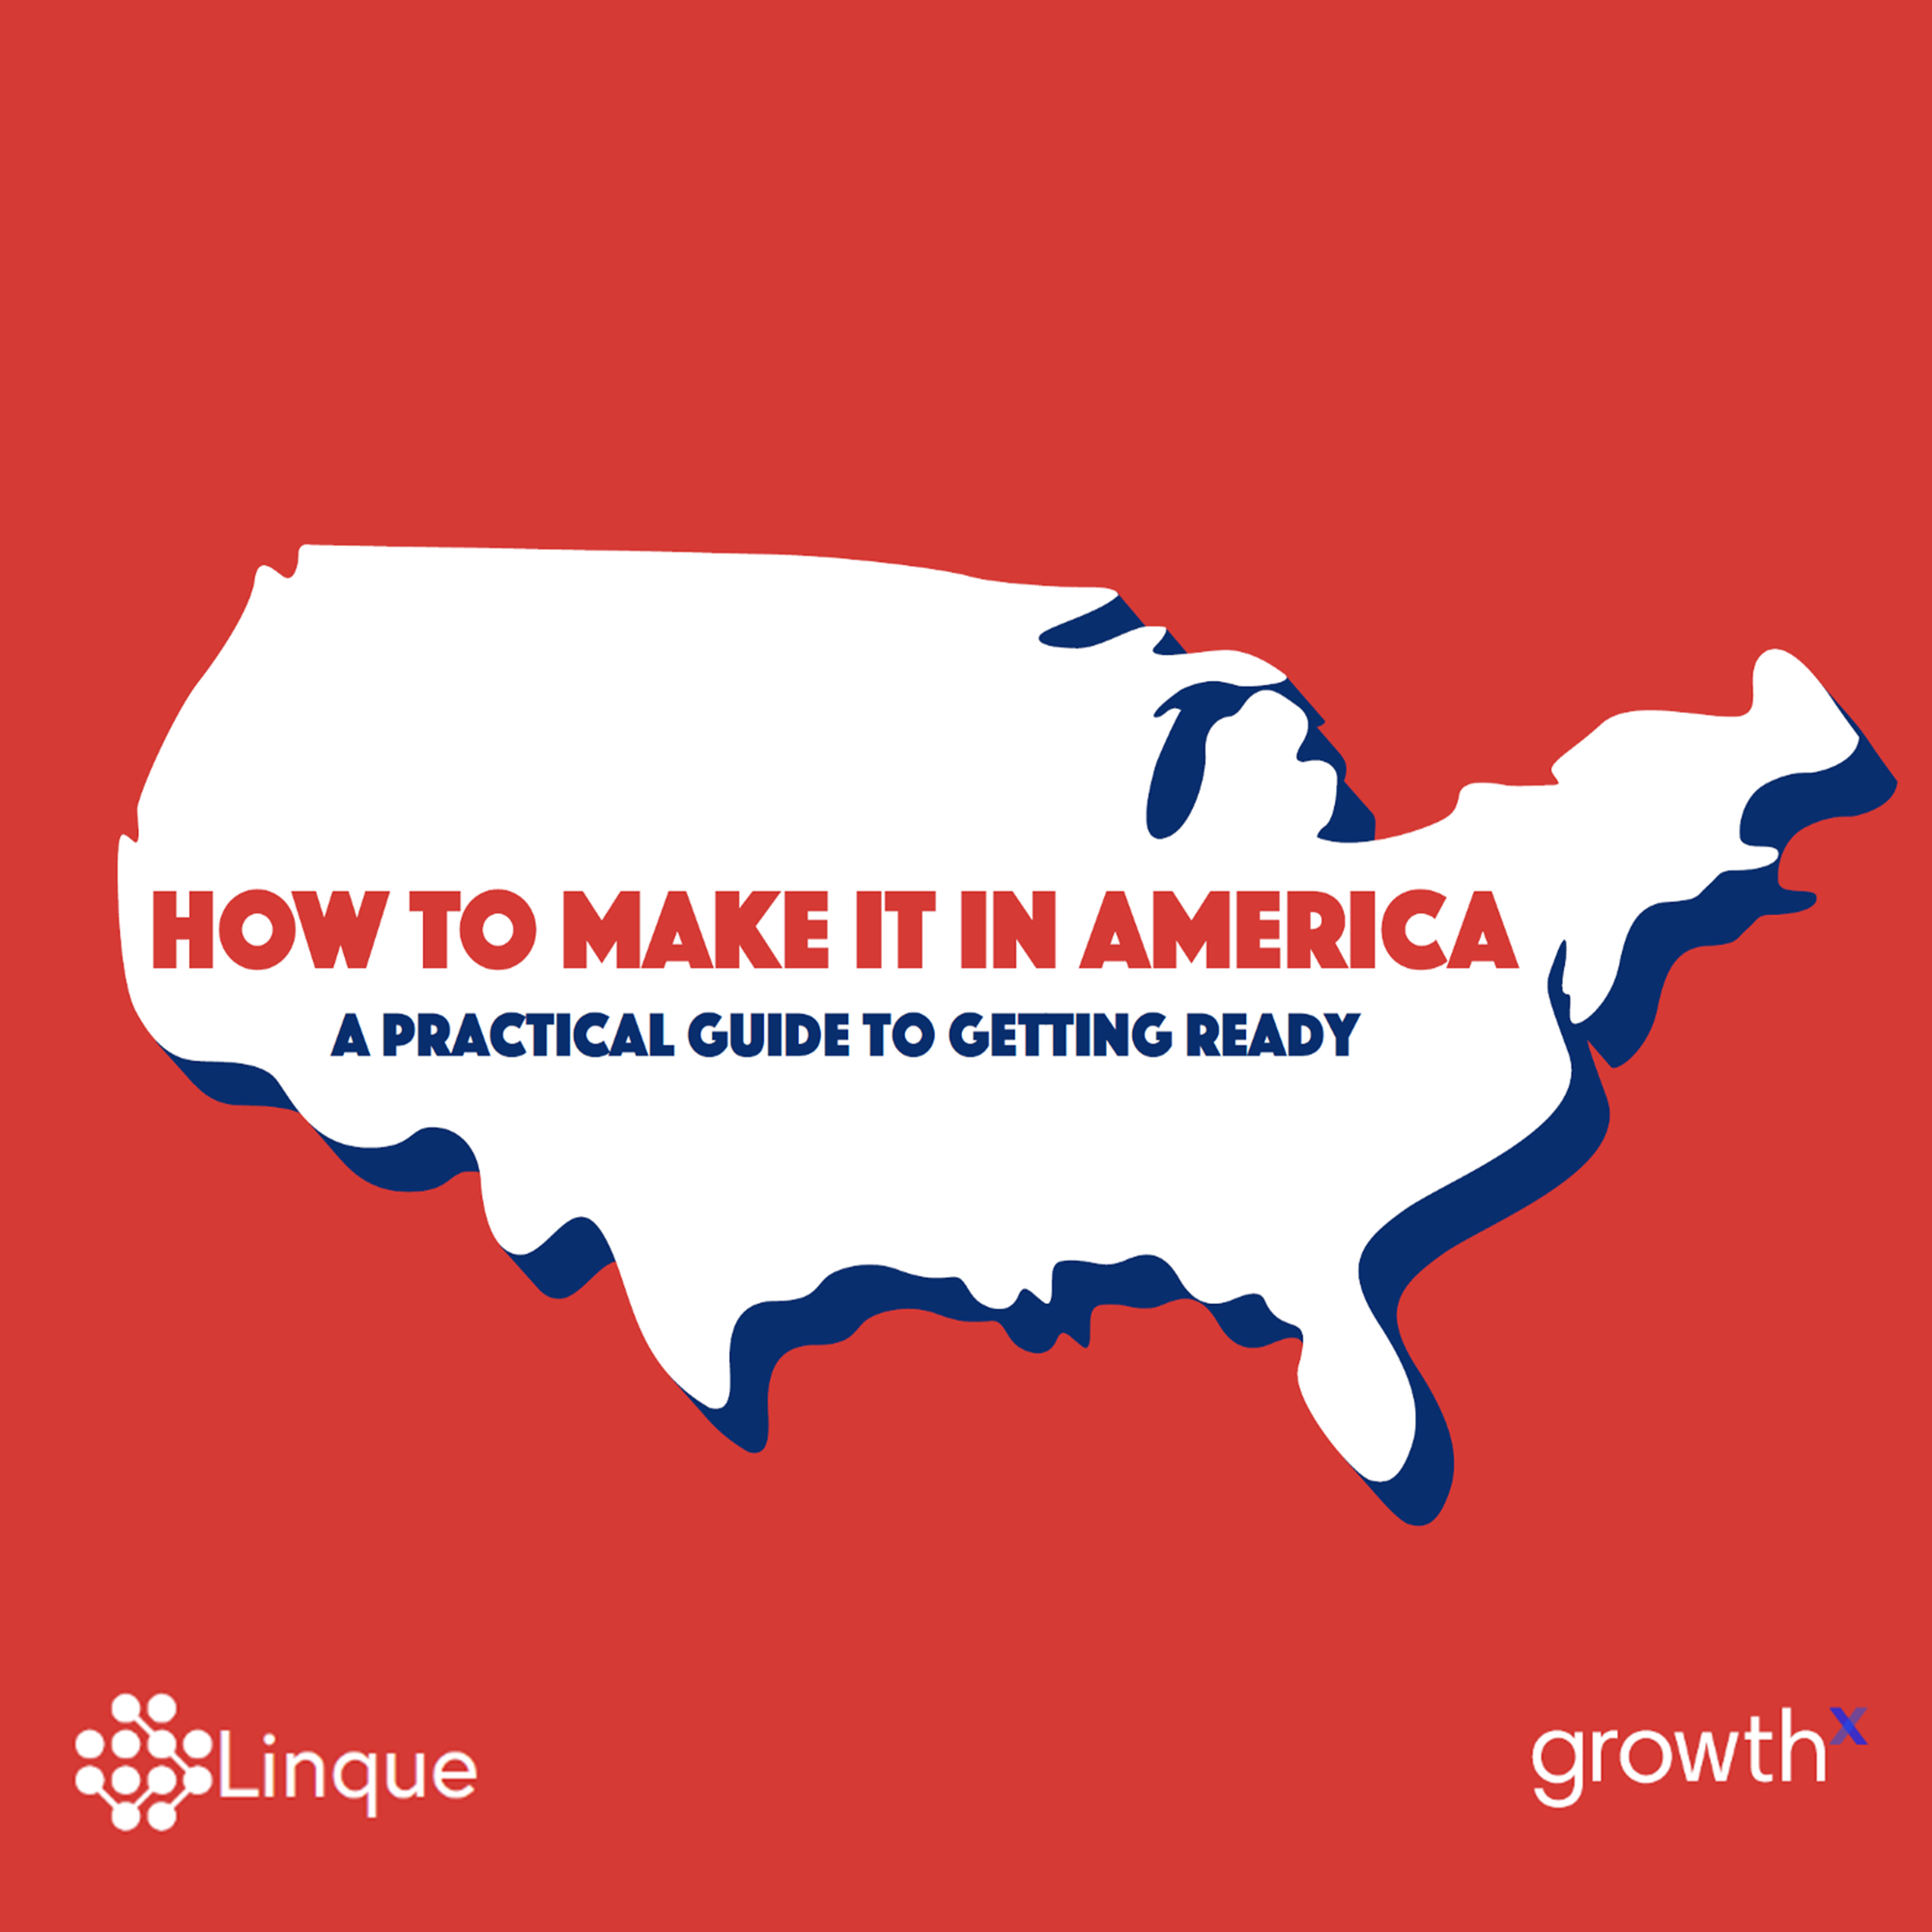 Ultimate Guide to preparing your startup to launch in the USA